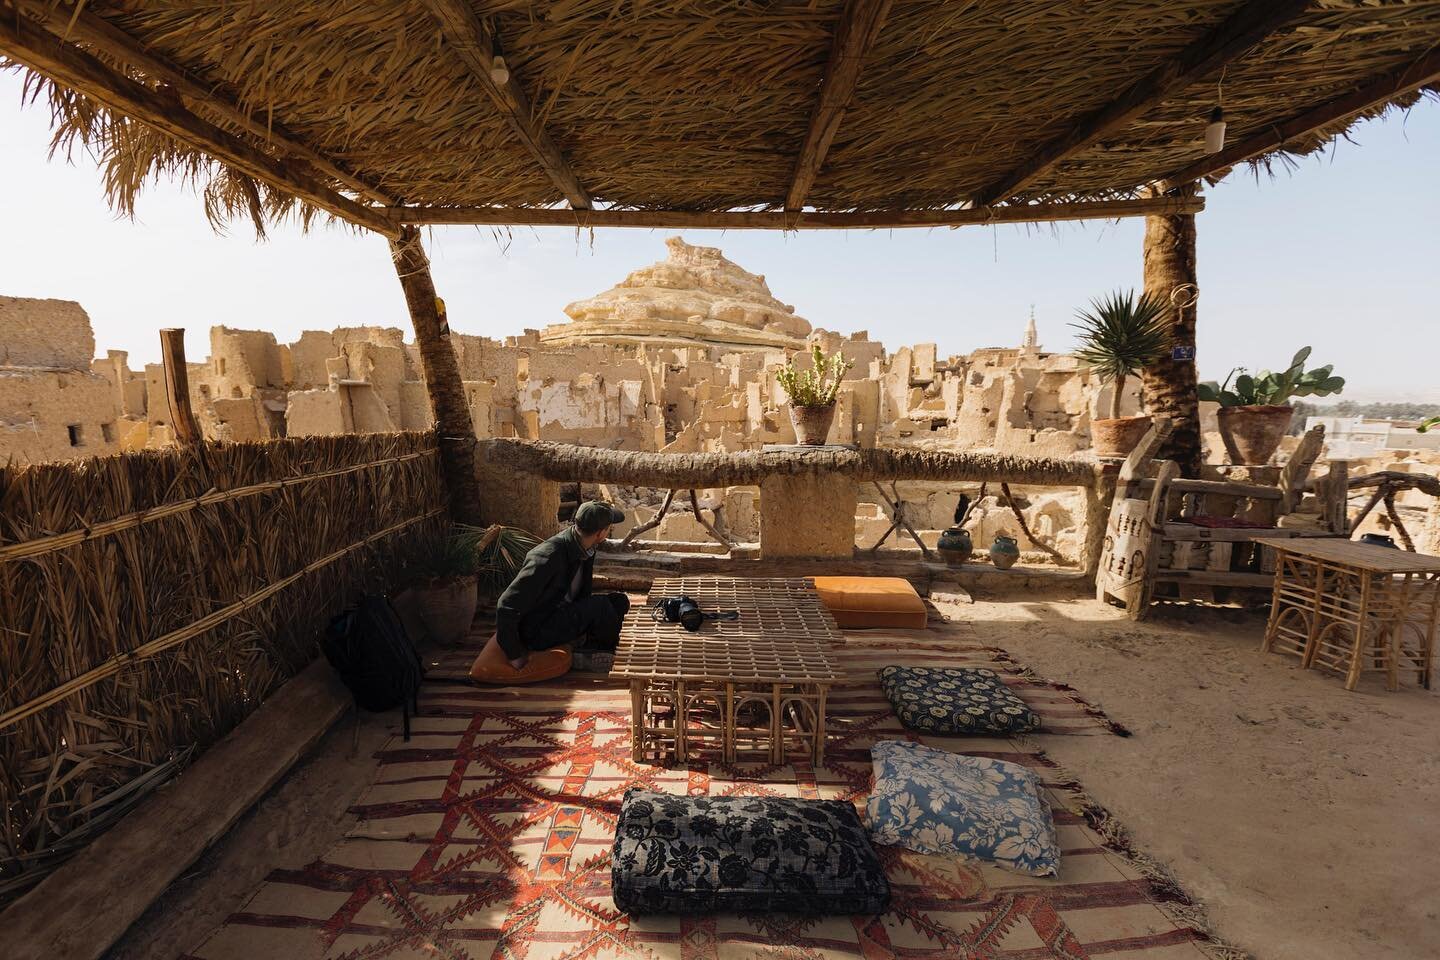 I&rsquo;m hung up on this beautiful place. Siwa was our favourite part of the Egypt trip and I think maybe I&rsquo;ll have to go back for a visit one day.